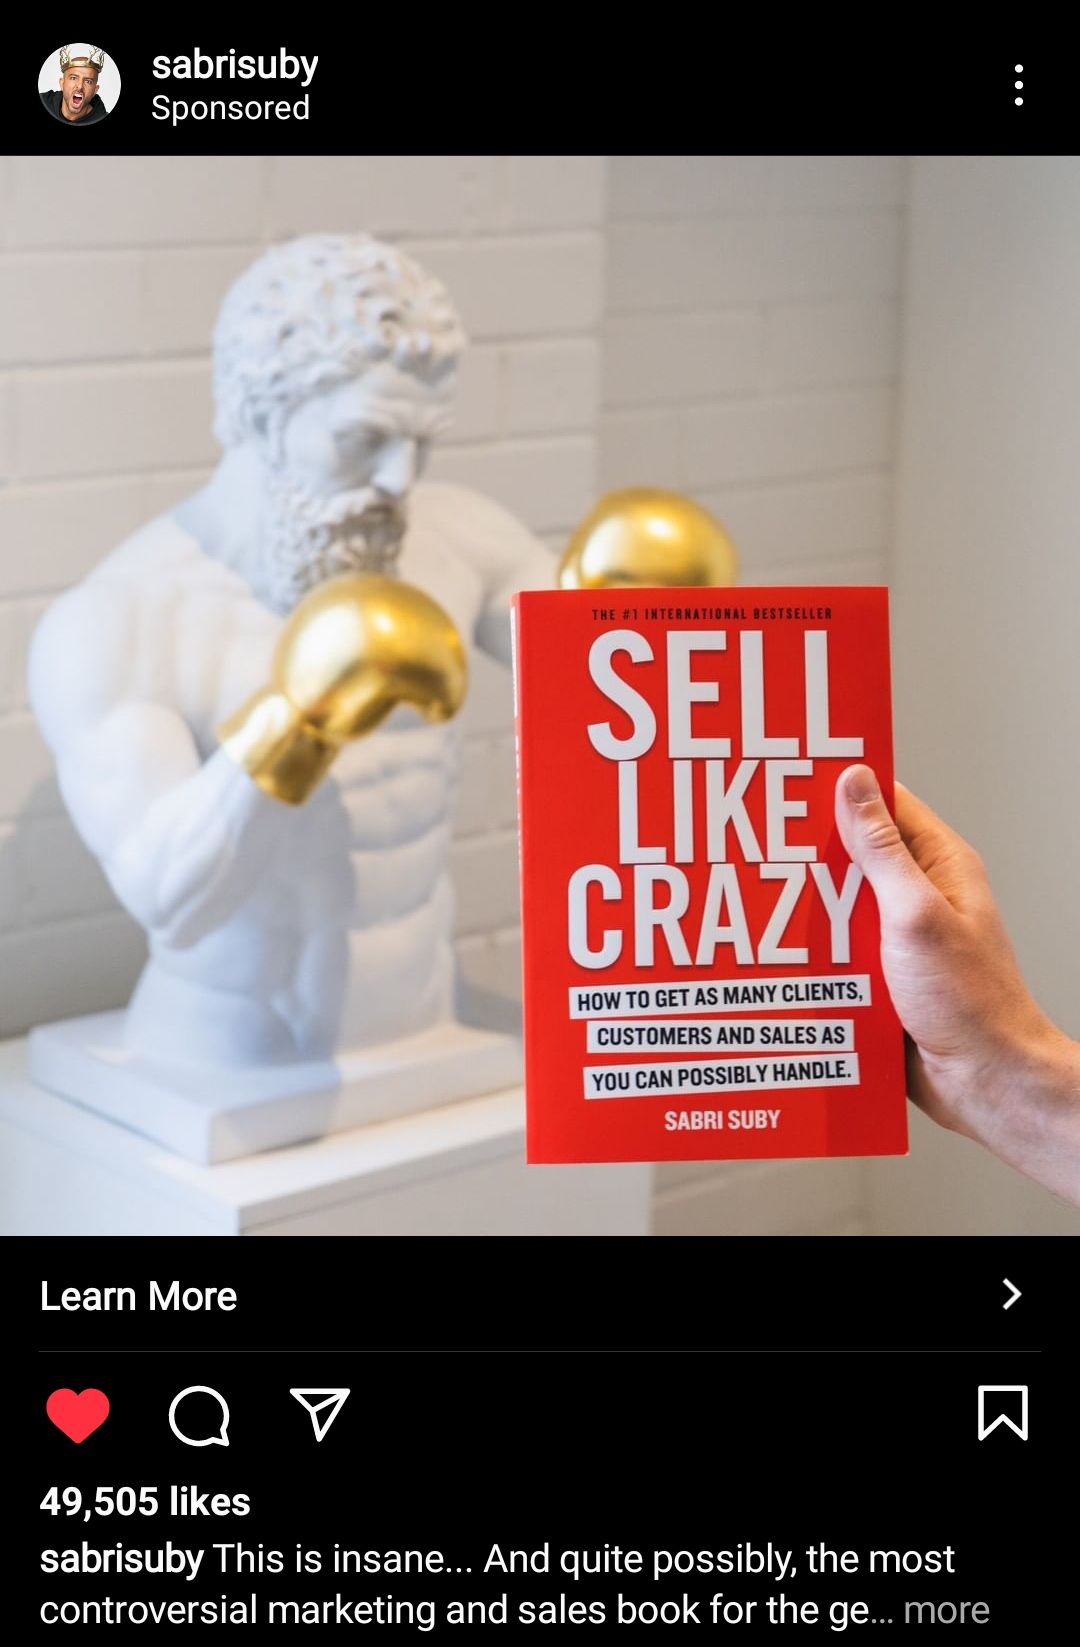 Sabri Suby's ad for his Sell Like Crazy book